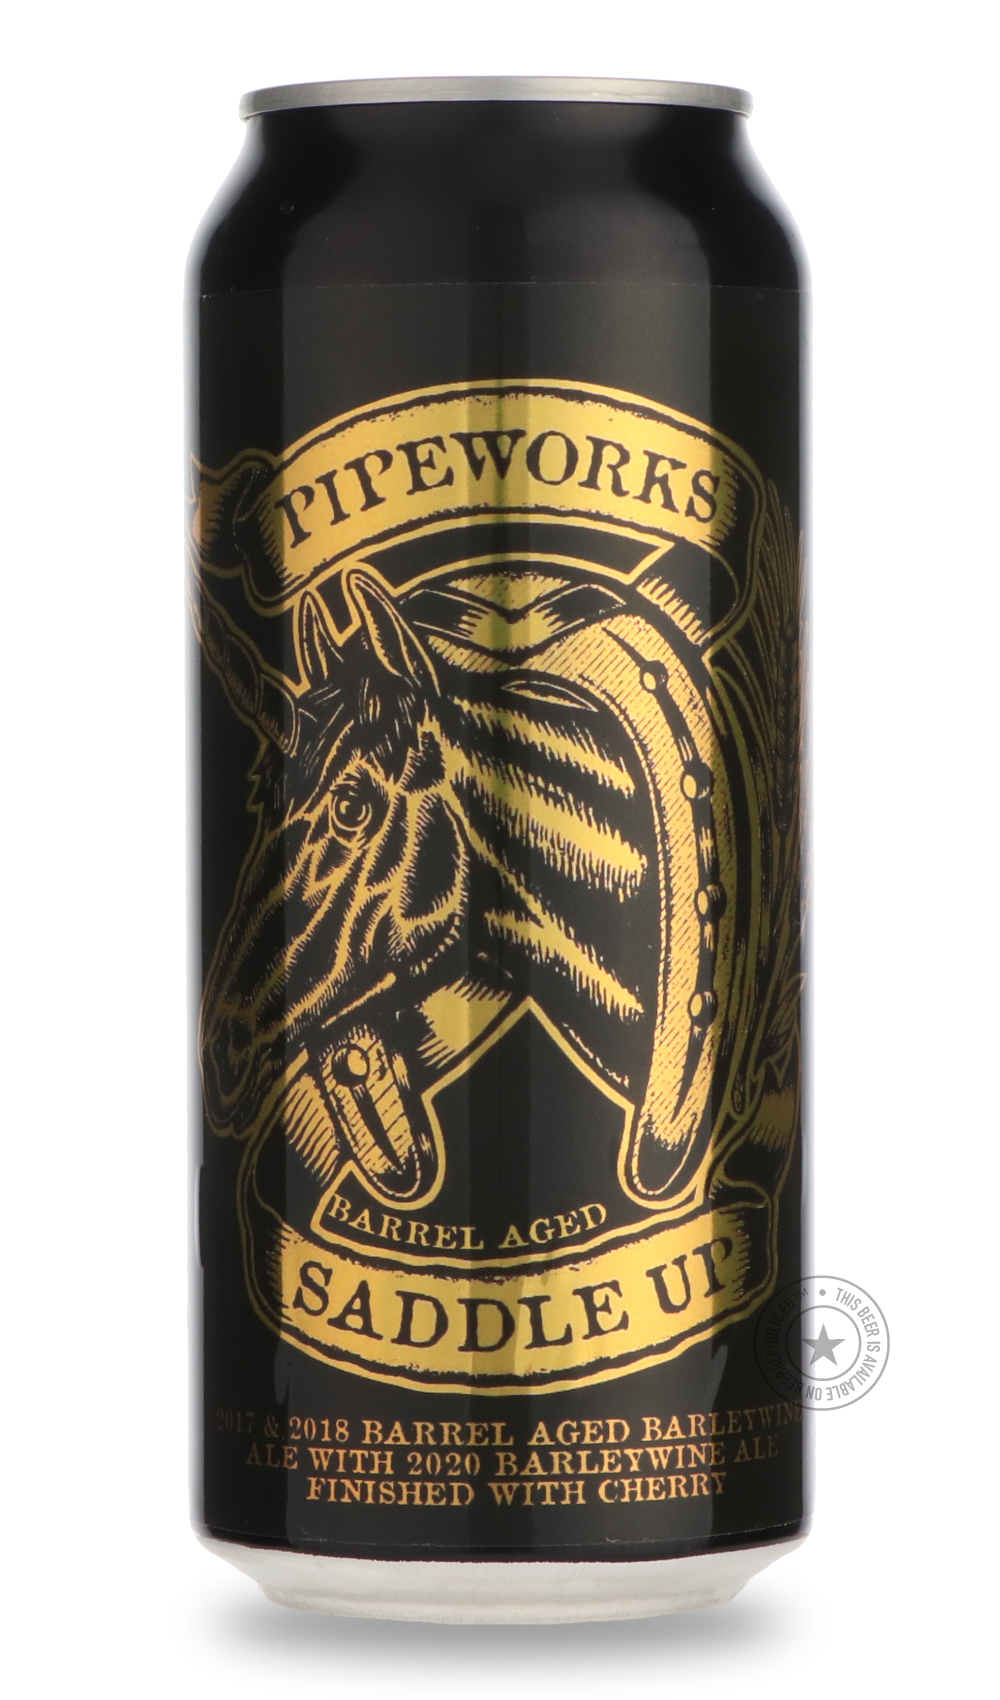 -Pipeworks- Barrel Aged Saddle Up-Brown & Dark- Only @ Beer Republic - The best online beer store for American & Canadian craft beer - Buy beer online from the USA and Canada - Bier online kopen - Amerikaans bier kopen - Craft beer store - Craft beer kopen - Amerikanisch bier kaufen - Bier online kaufen - Acheter biere online - IPA - Stout - Porter - New England IPA - Hazy IPA - Imperial Stout - Barrel Aged - Barrel Aged Imperial Stout - Brown - Dark beer - Blond - Blonde - Pilsner - Lager - Wheat - Weizen 